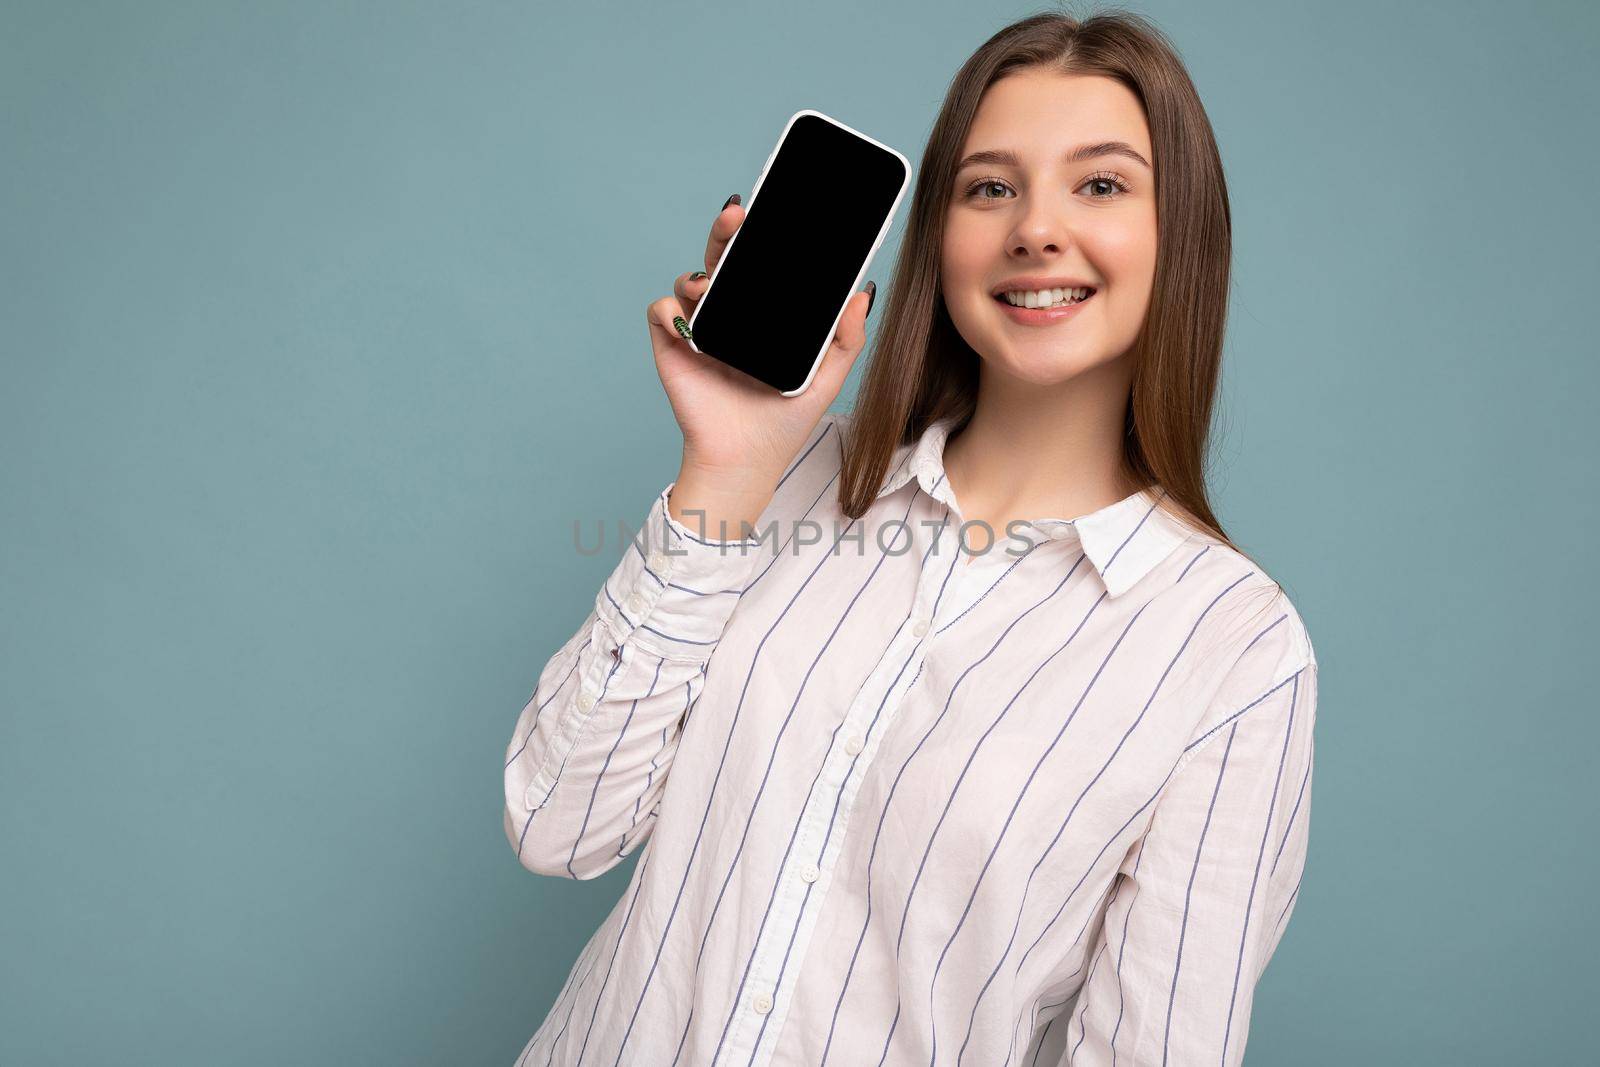 Photo of beautiful smiling young woman good looking wearing casual stylish outfit standing isolated on background with copy space holding smartphone showing phone in hand with empty screen display for mockup looking at camera by TRMK